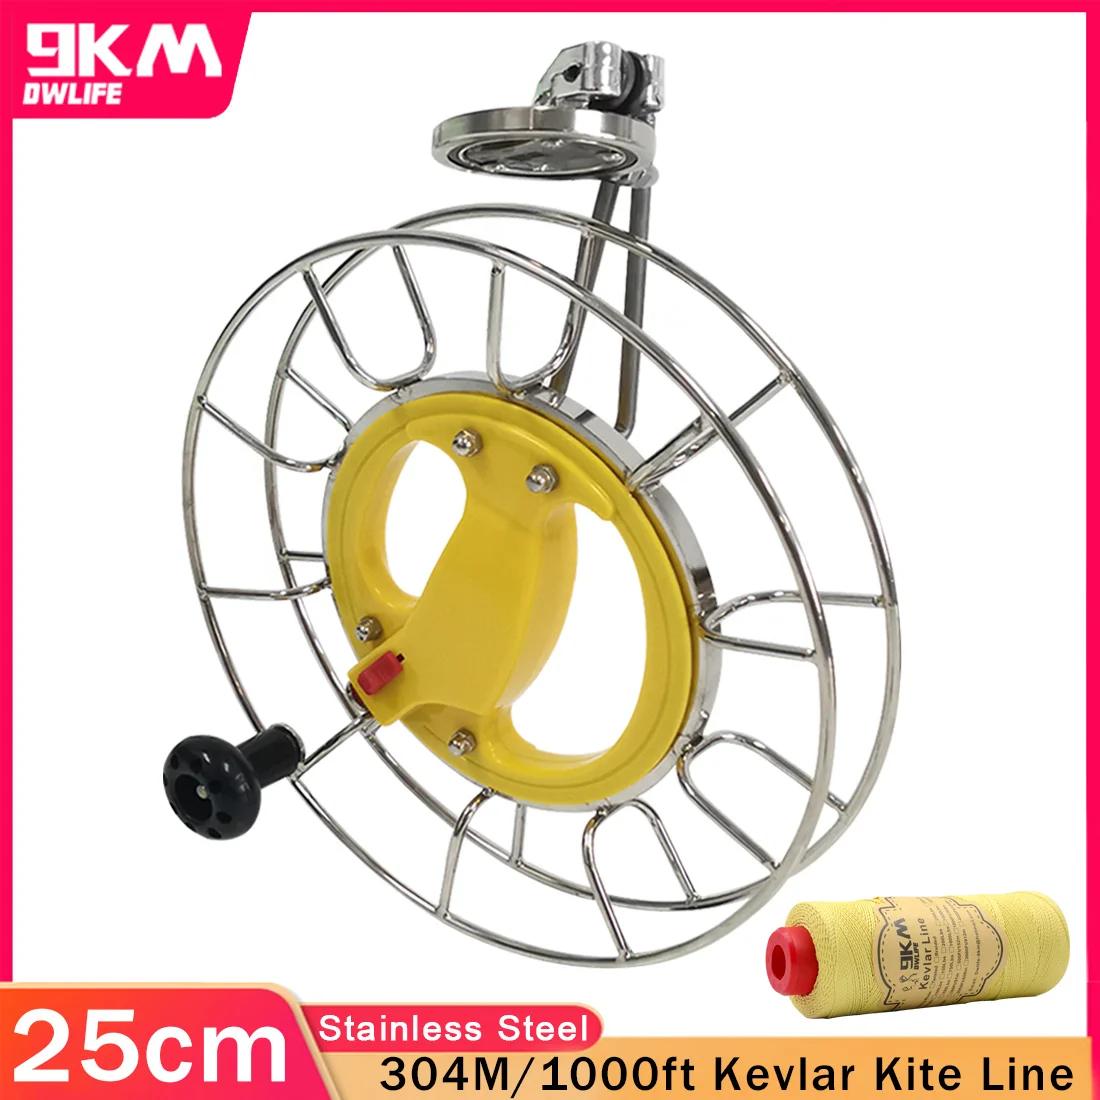 9KM Stainless Steel 25cm Kite Reel Locable Outdoor Sports Flying Tool Accessories with 1000ft / 304m Kevlar Kite String